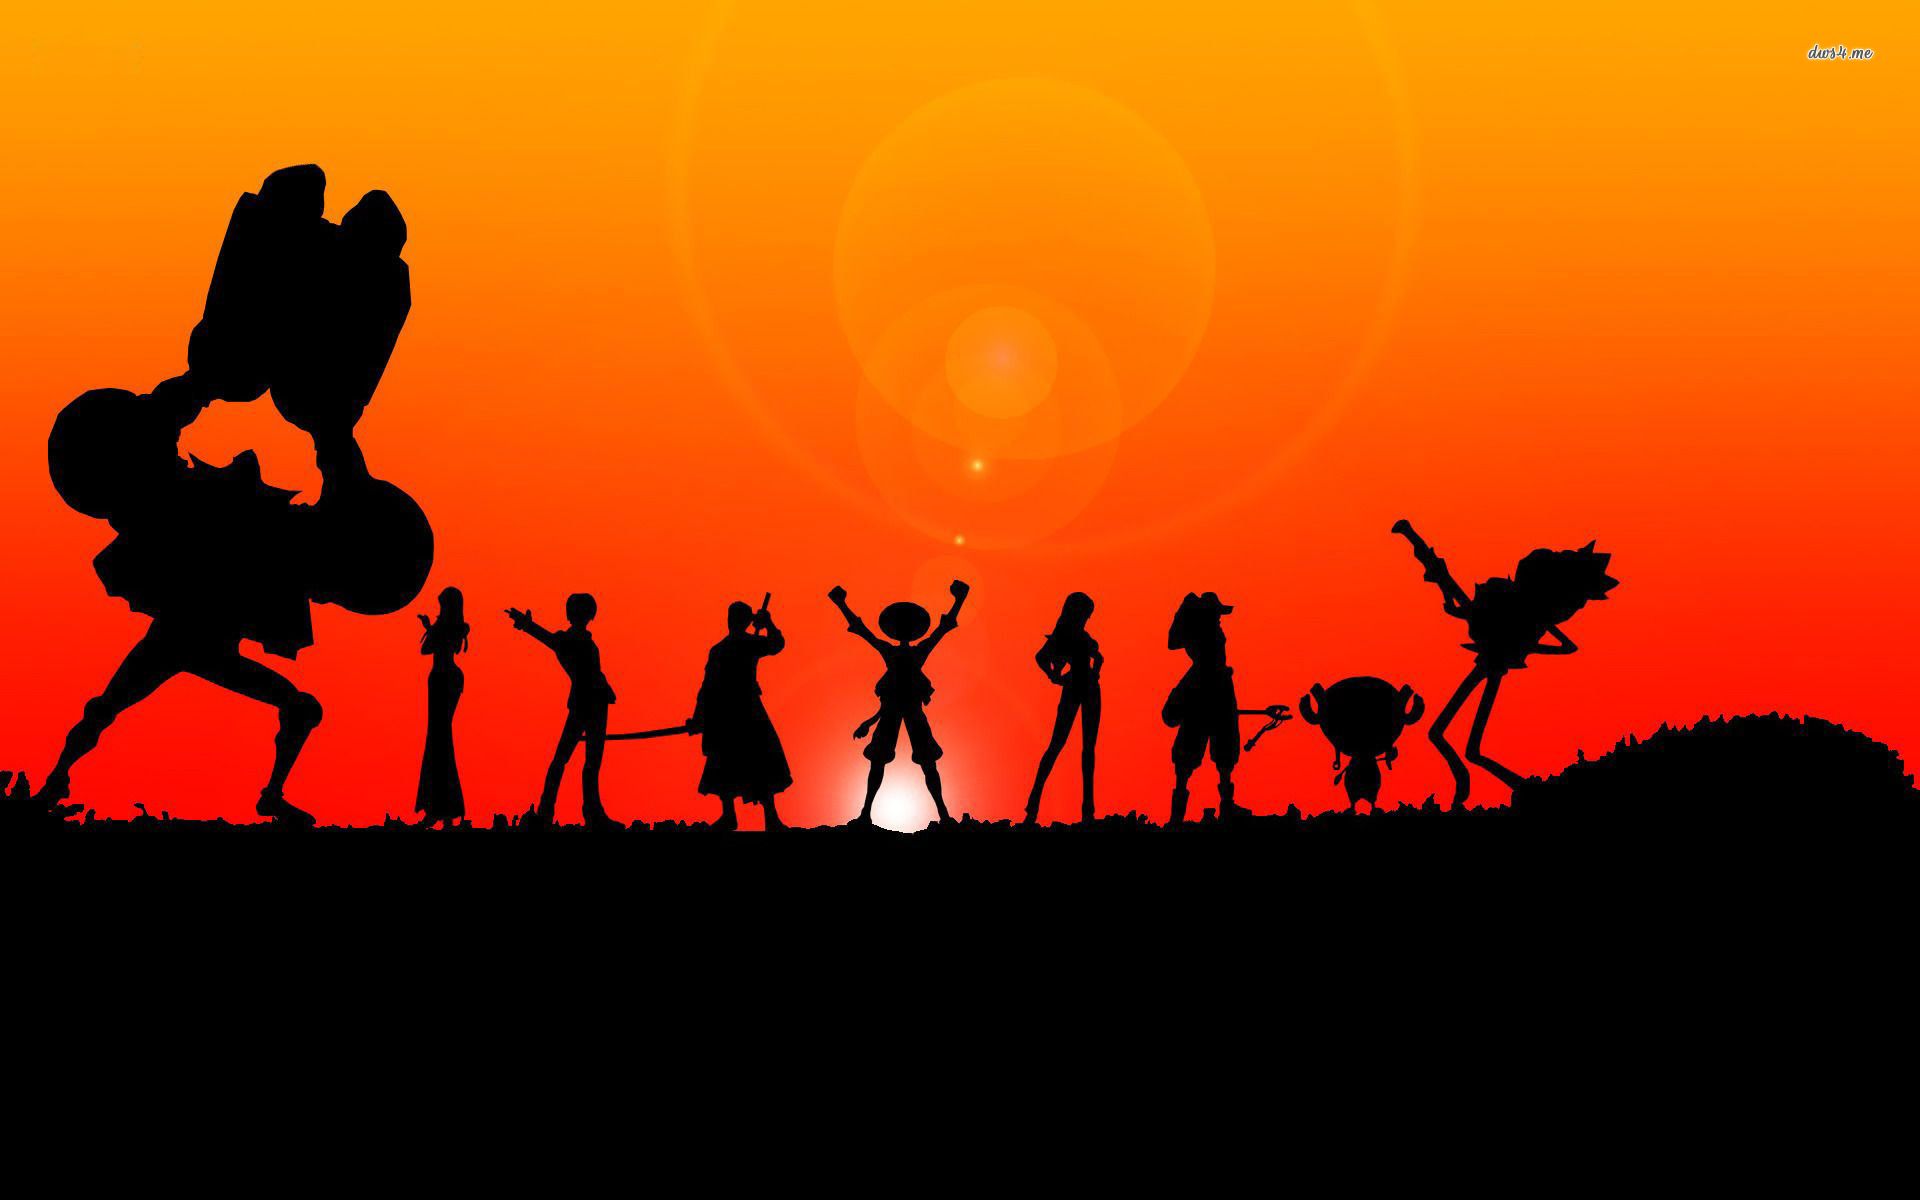 One Piece silhouettes wallpaper - Anime wallpapers - #20325